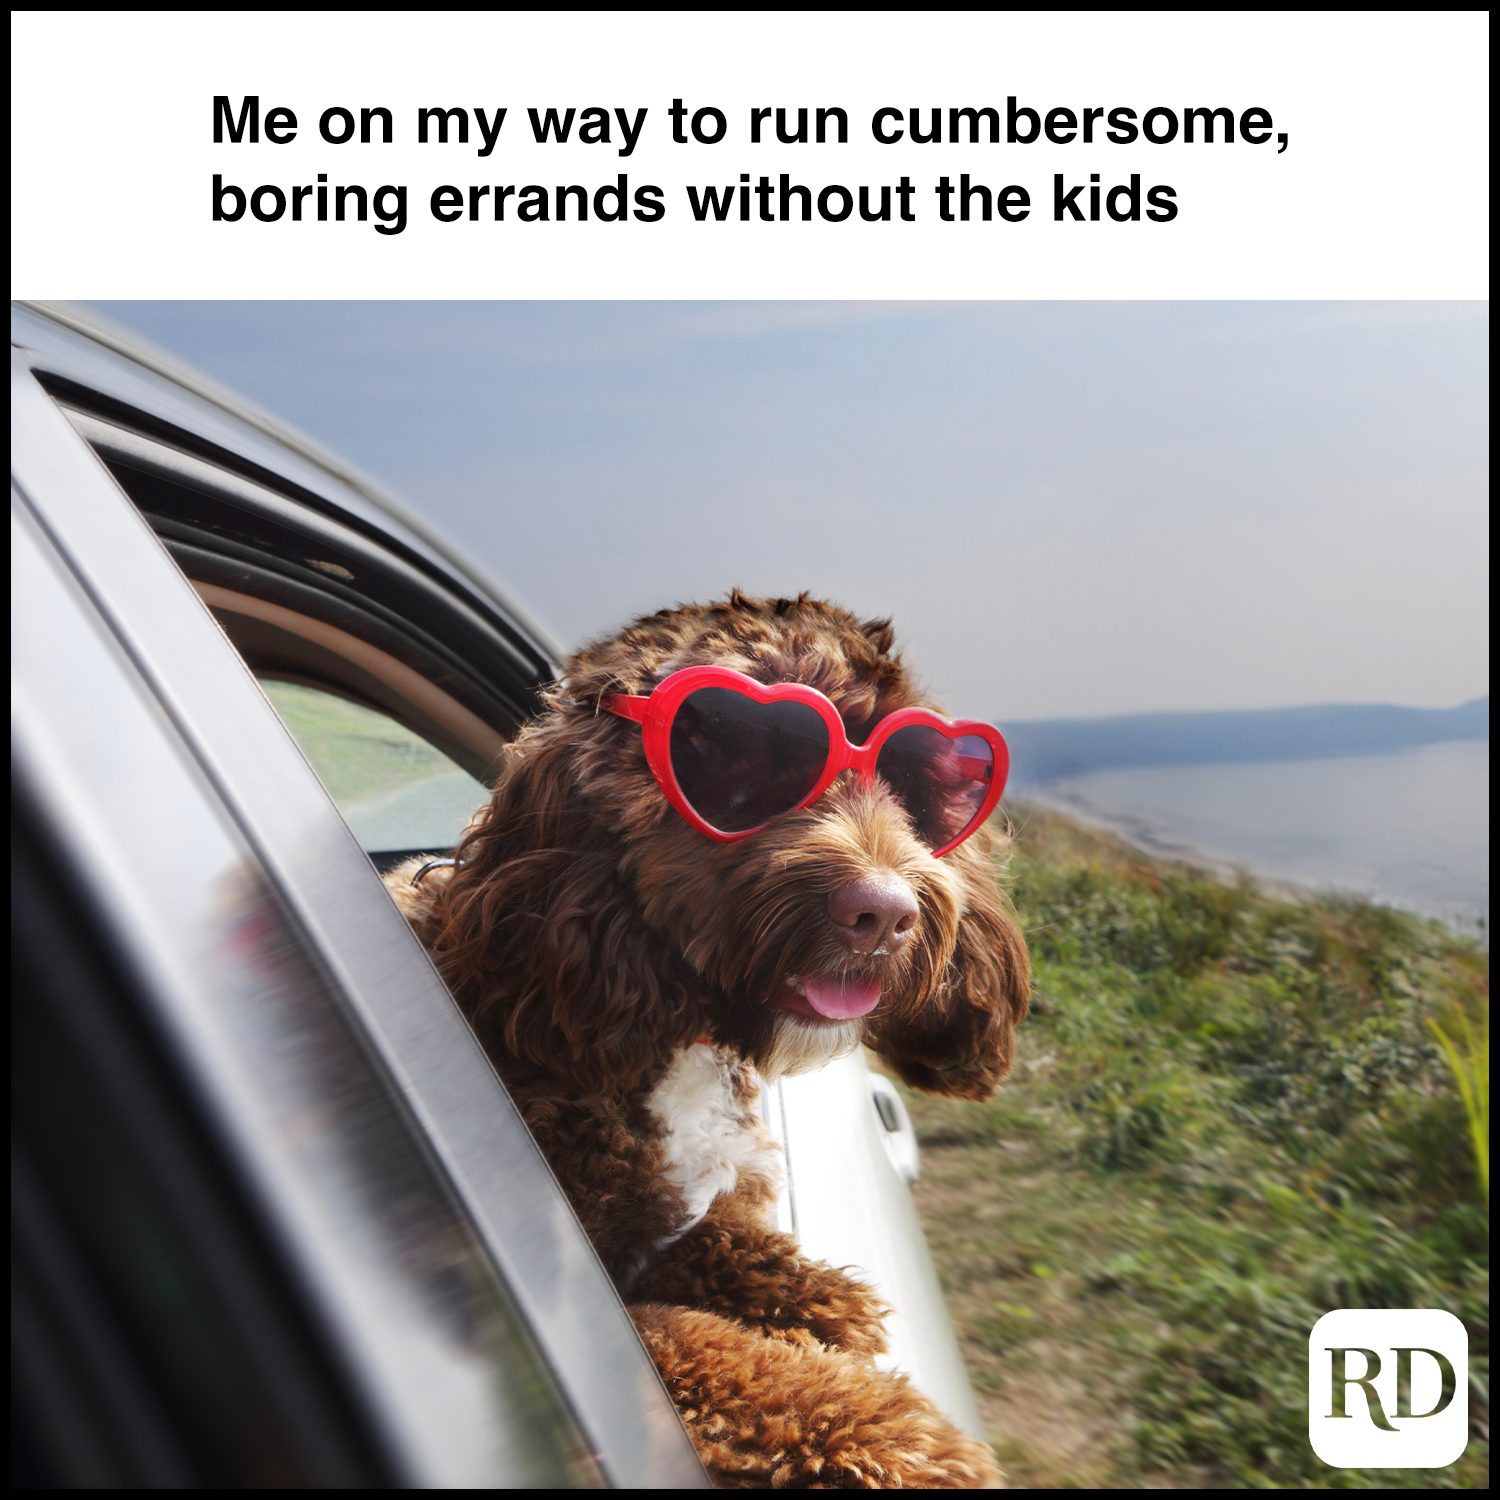 Dog sticking head out window. MEME TEXT: Me on my way to run cumbersome, boring errands without the kids